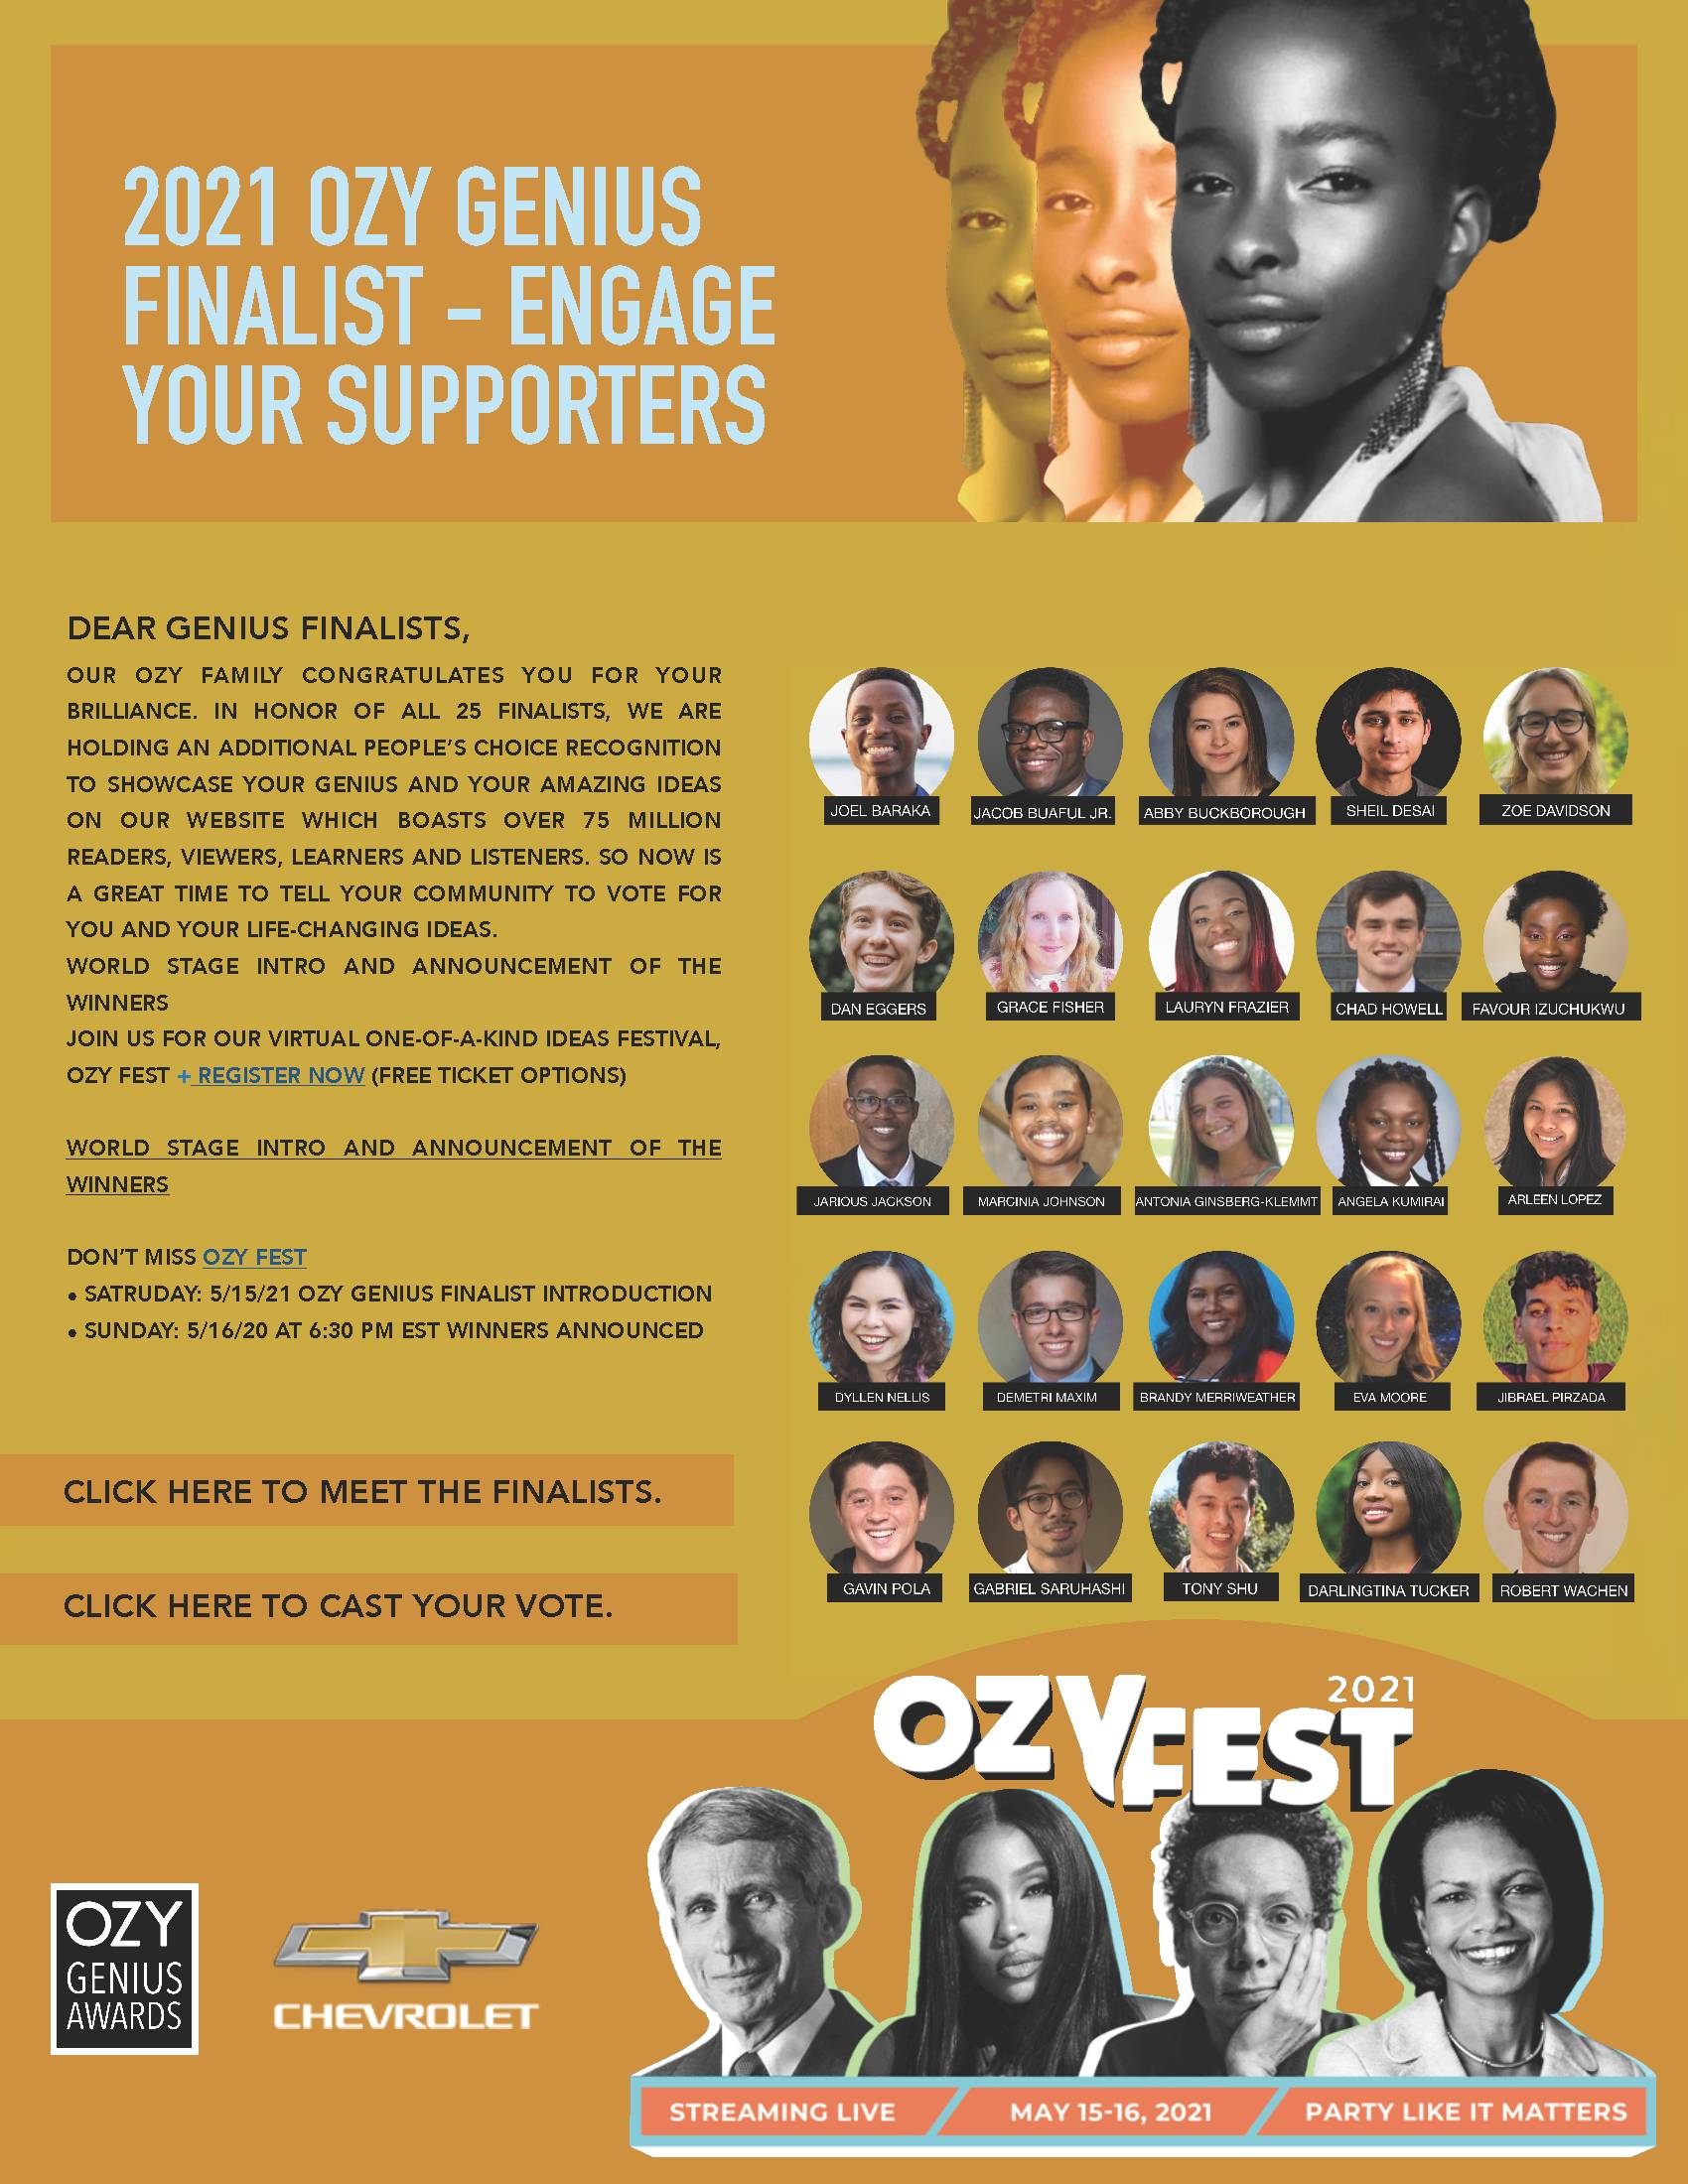 2021 OZY Genius Finalist - Engage Your Supporters